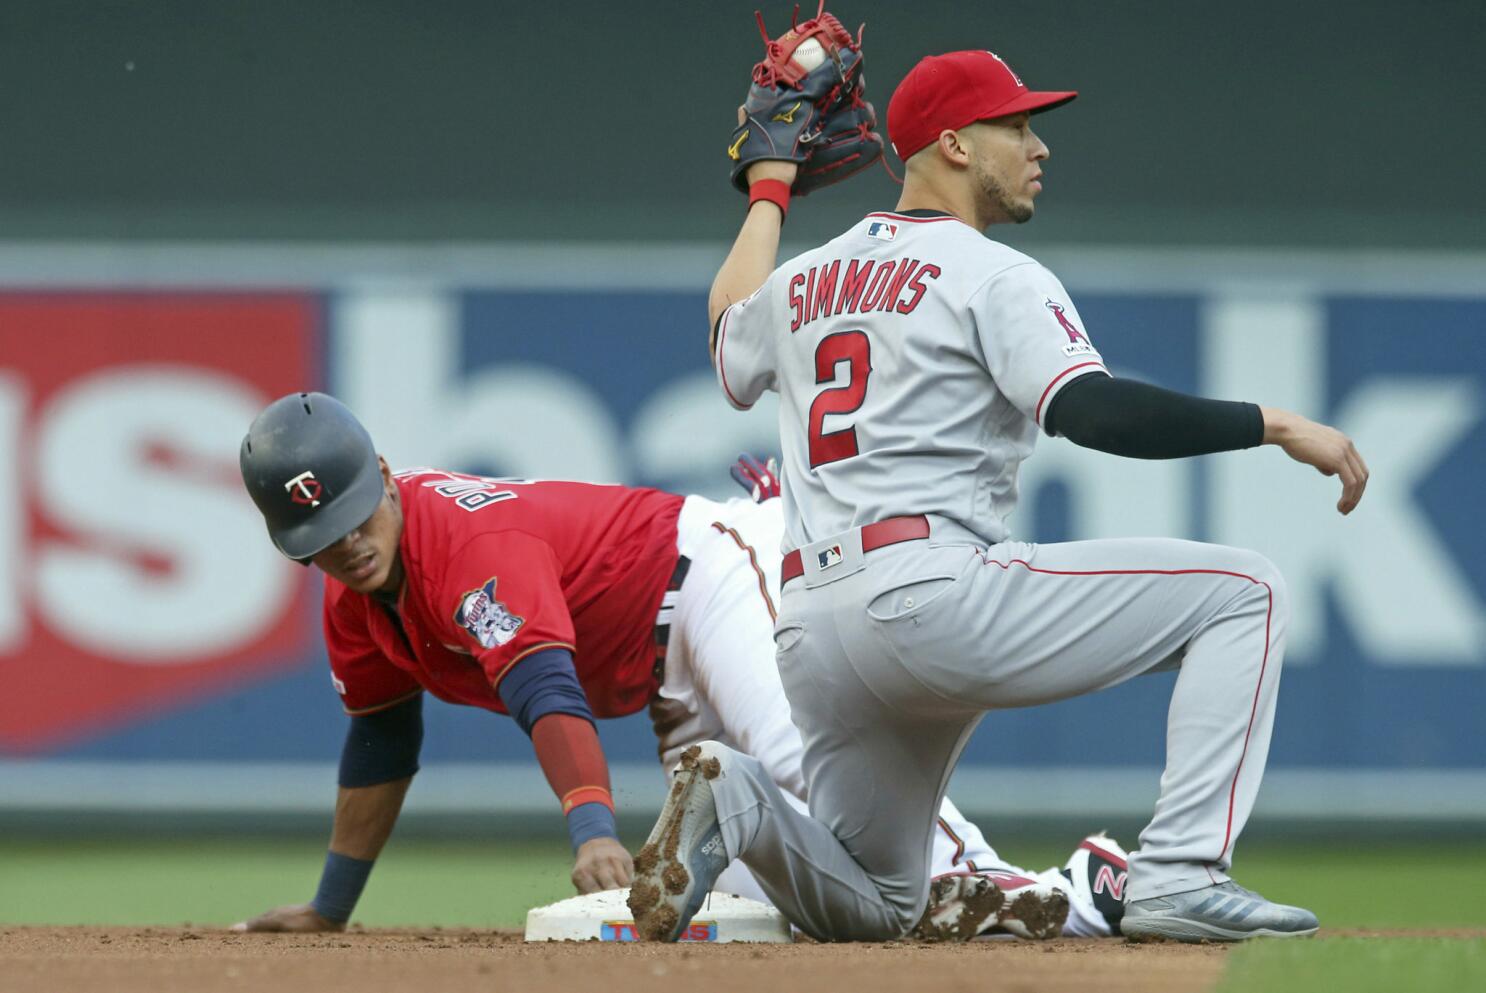 No surgery for Angels' Andrelton Simmons, who is 'hoping for a